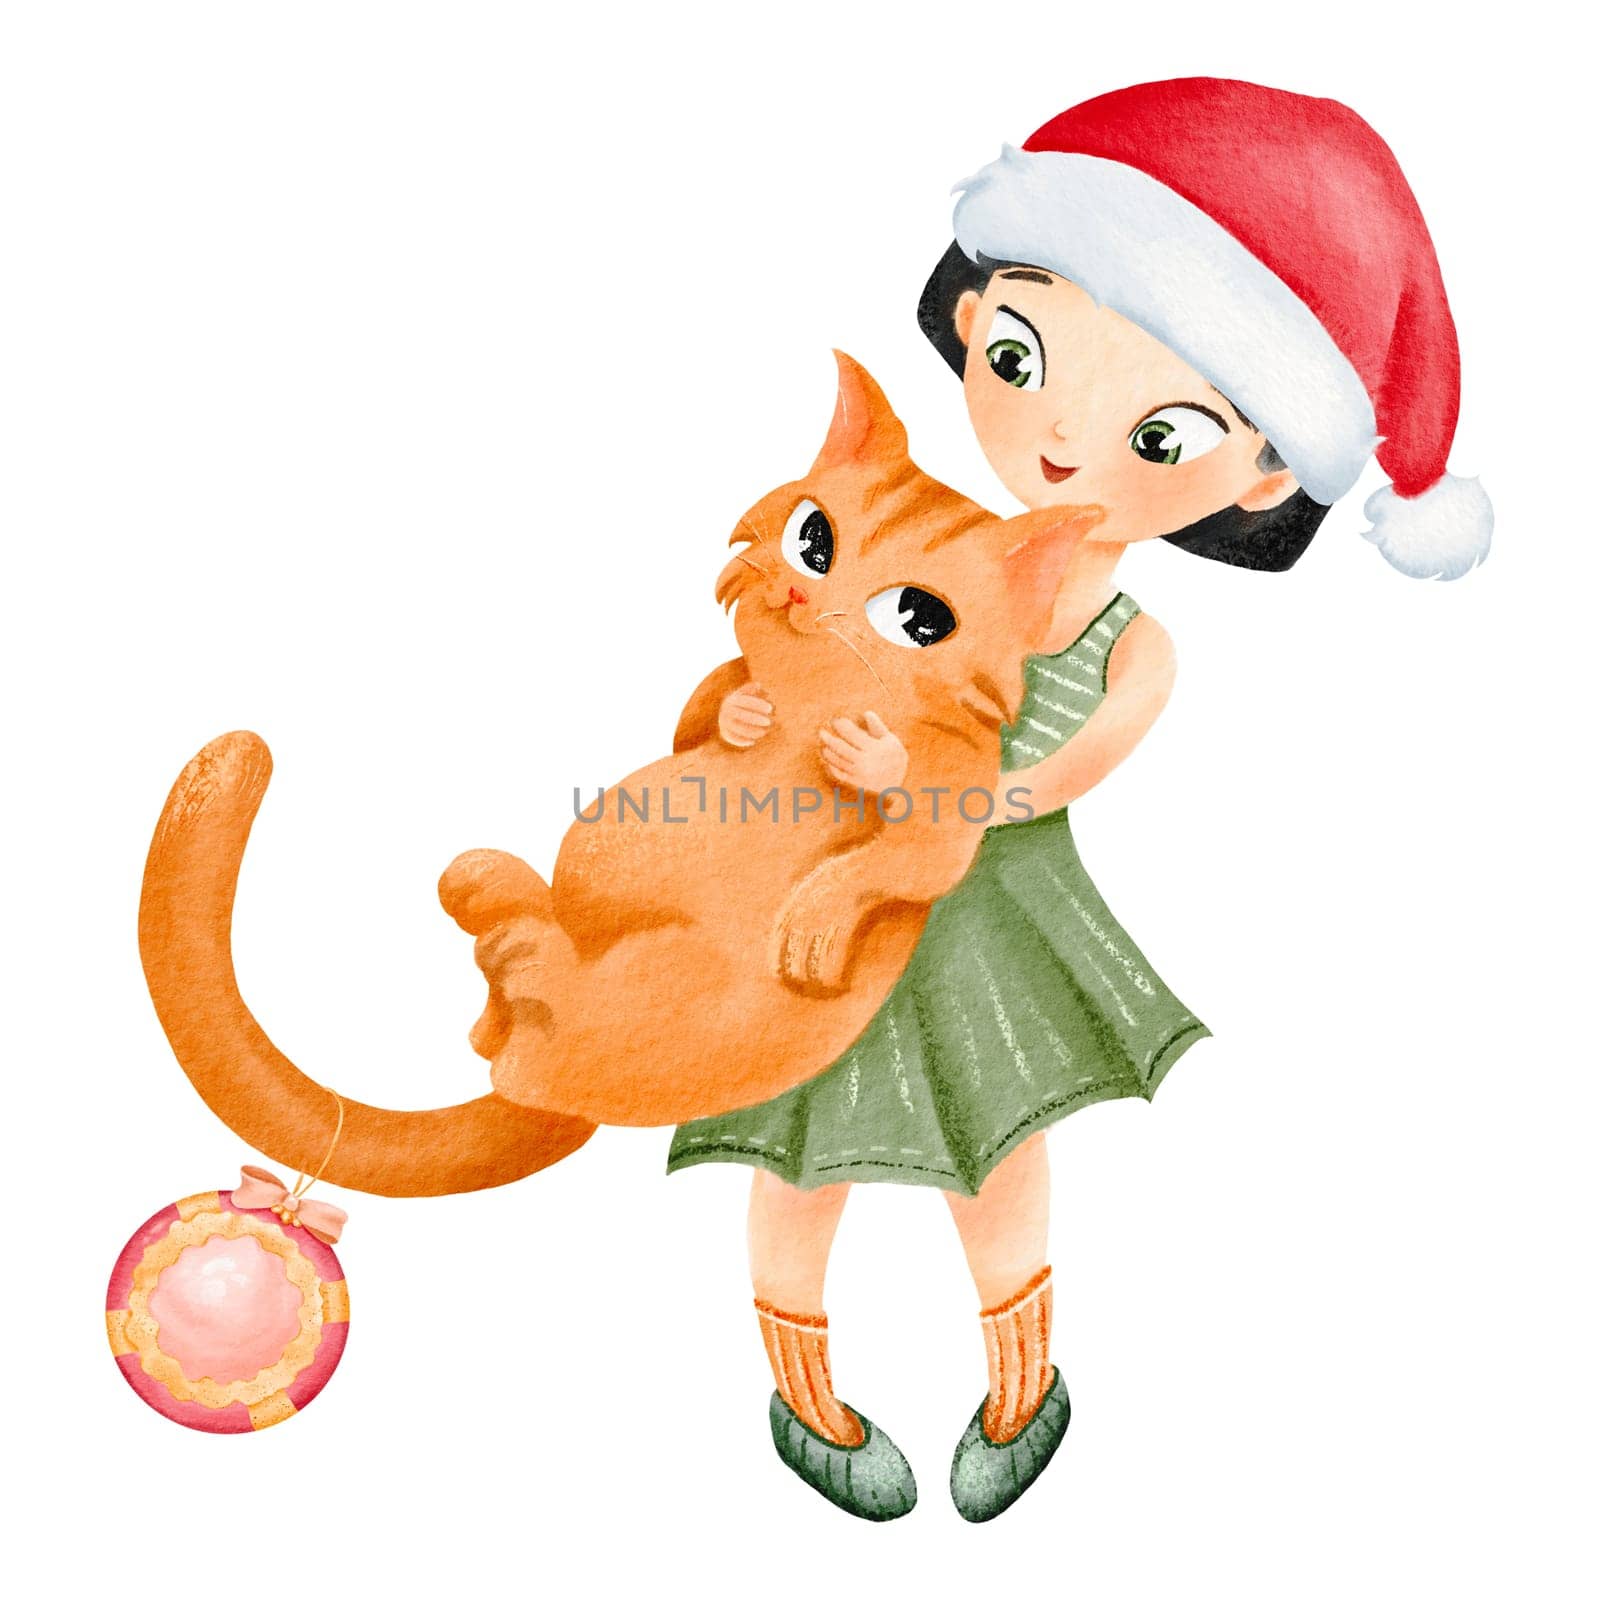 Watercolor merry Christmas composition. Girl in New Year hat holds red cat in arms. Asian teen and fat pet. Kitty Christmas ball. Decorative background for greeting card, bauble decorations, books.